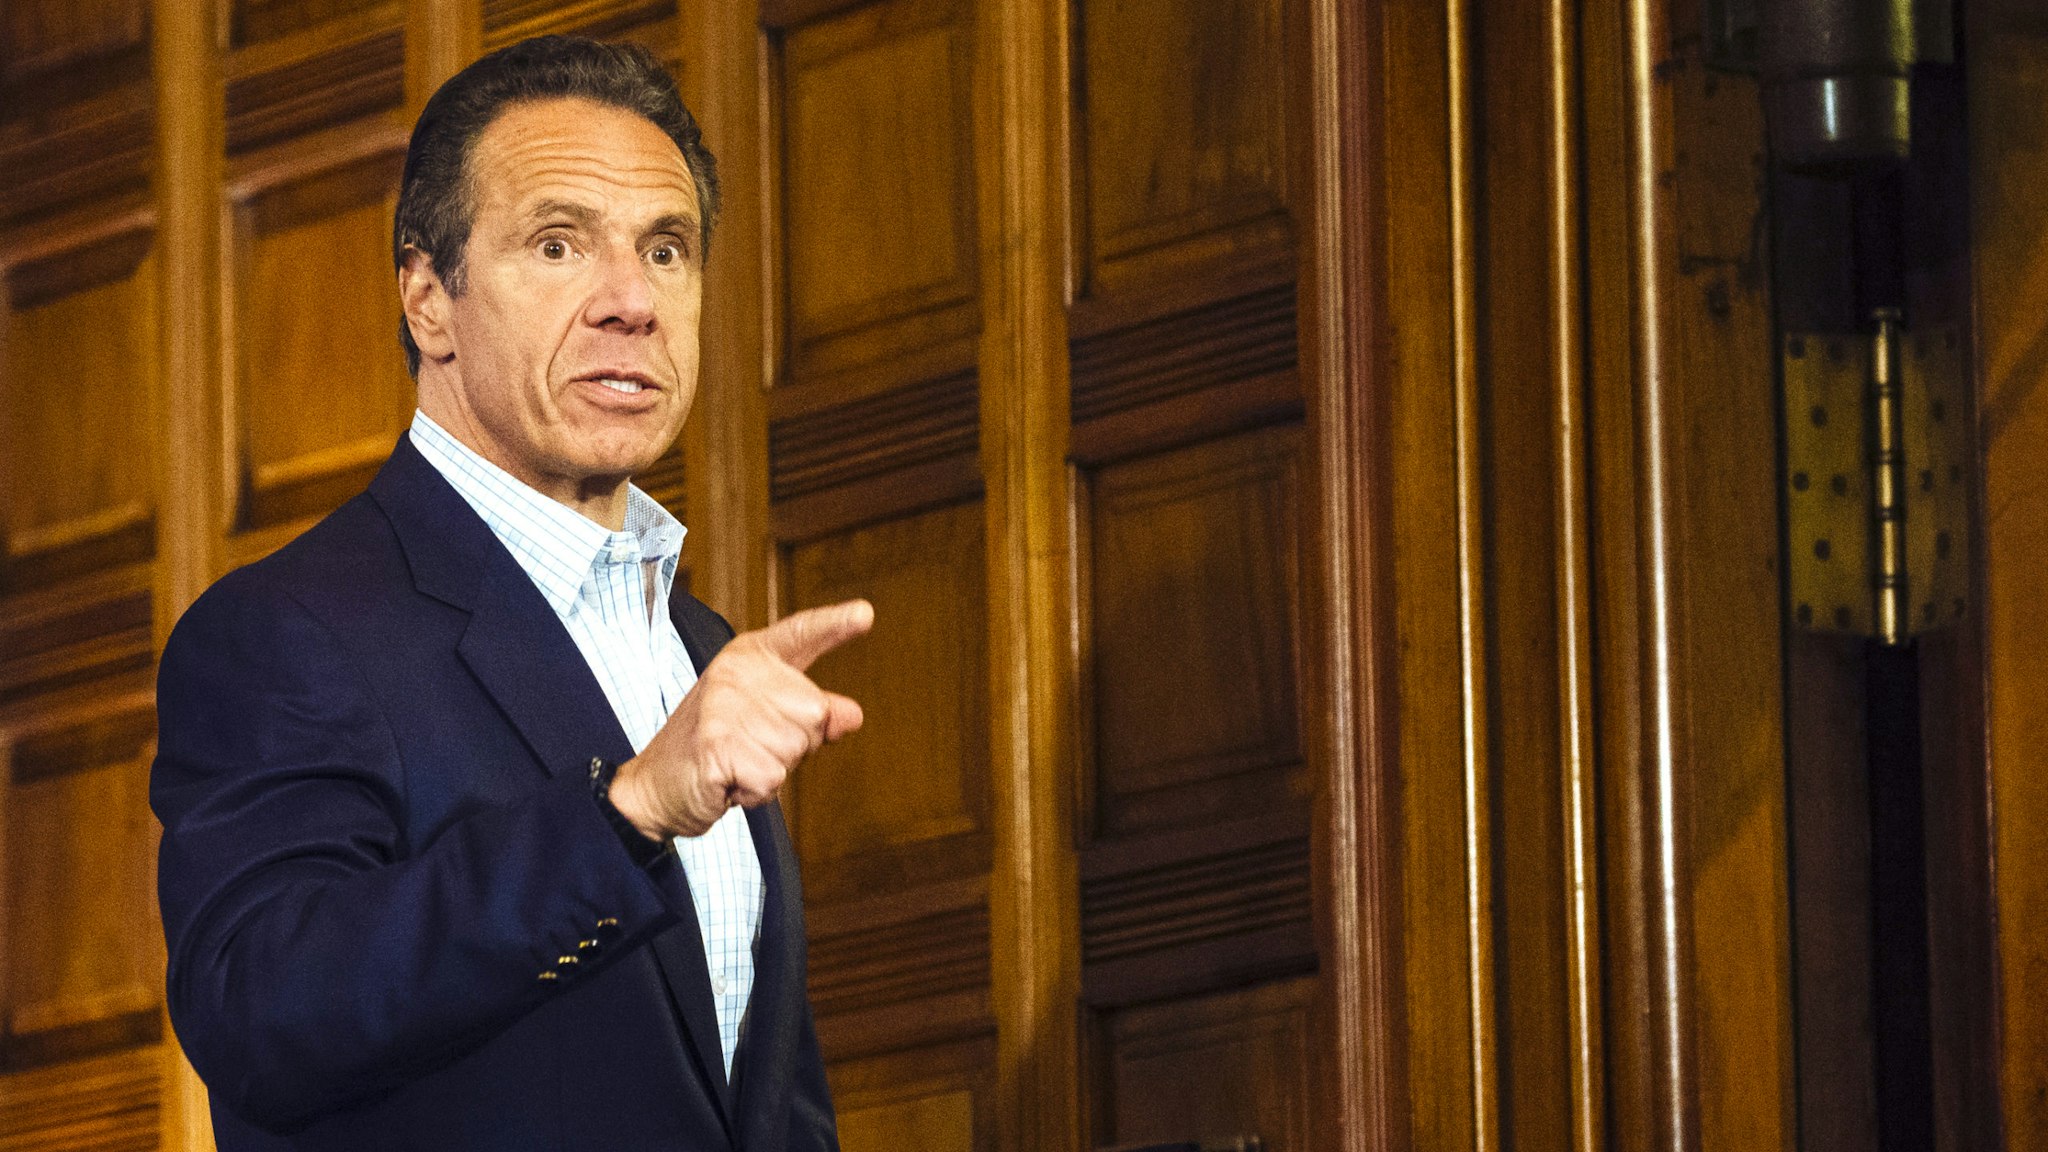 Andrew Cuomo, governor of New York, gestures as he leaves a news conference in the Red Room of the New York State Capitol Building in Albany, New York, U.S., on Sunday, May 17, 2020. Cuomo pleaded on Sunday for more New Yorkers to get tested for the coronavirus as the state reopens for business, engaging in a bit of political theater as he underwent a nasal swab test himself at his daily briefing